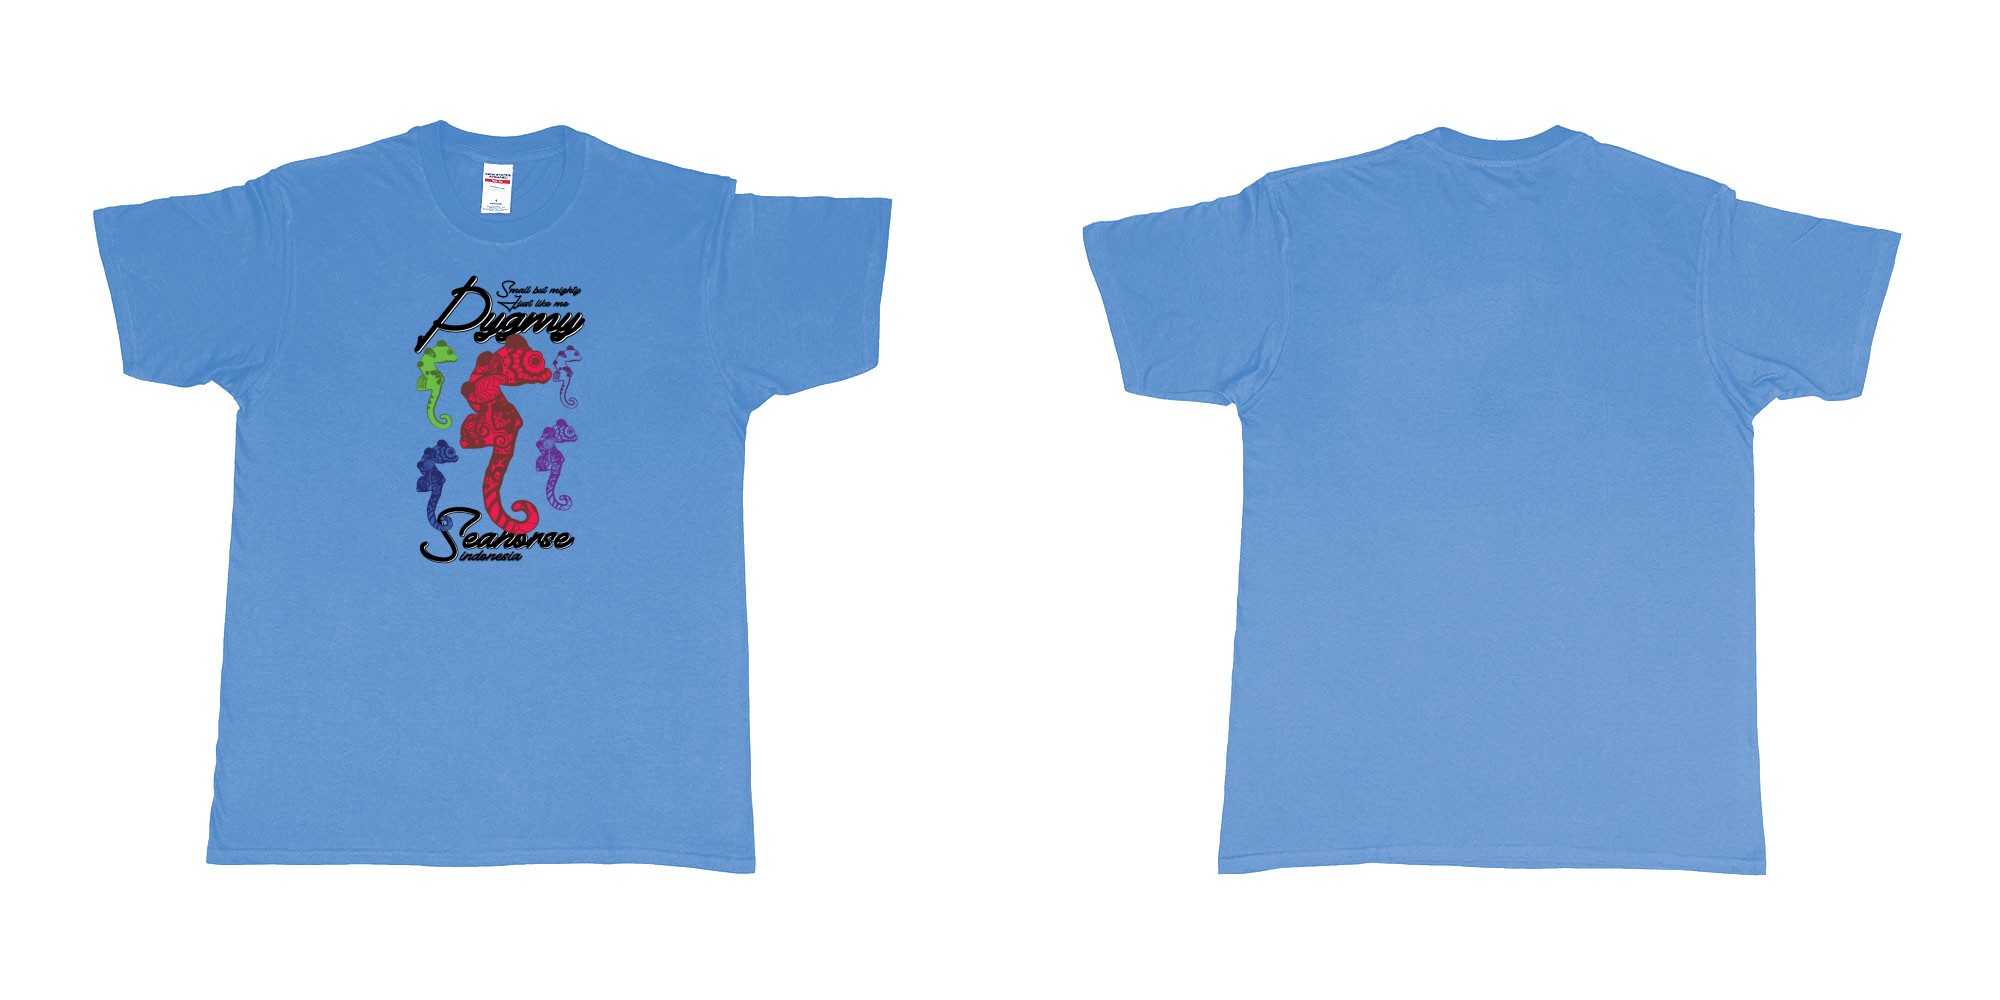 Custom tshirt design pygmy seahorse indonesia small but mighty just like me in fabric color carolina-blue choice your own text made in Bali by The Pirate Way